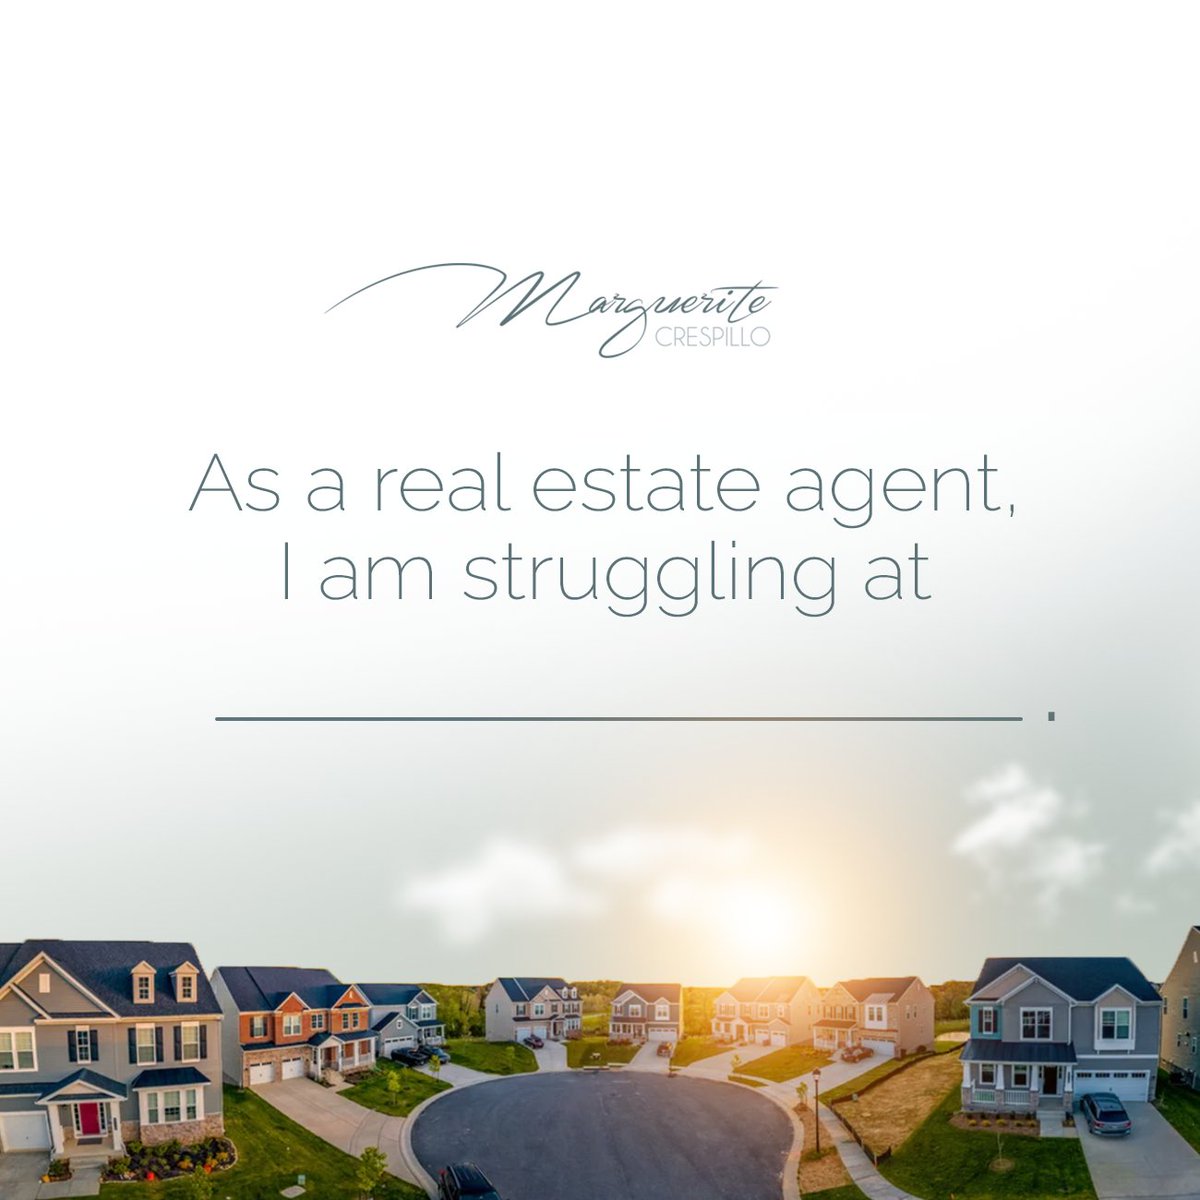 I'd love to hear your experiences and insights on this because your opinions matter. Drop your thoughts below. #RealEstateRealWorld #RealEstate #Realtor #MargueriteCrespillo #PropertyMarketChallenges #RealEstateCommunity #RealEstateConversations #AgentSupportNetwork